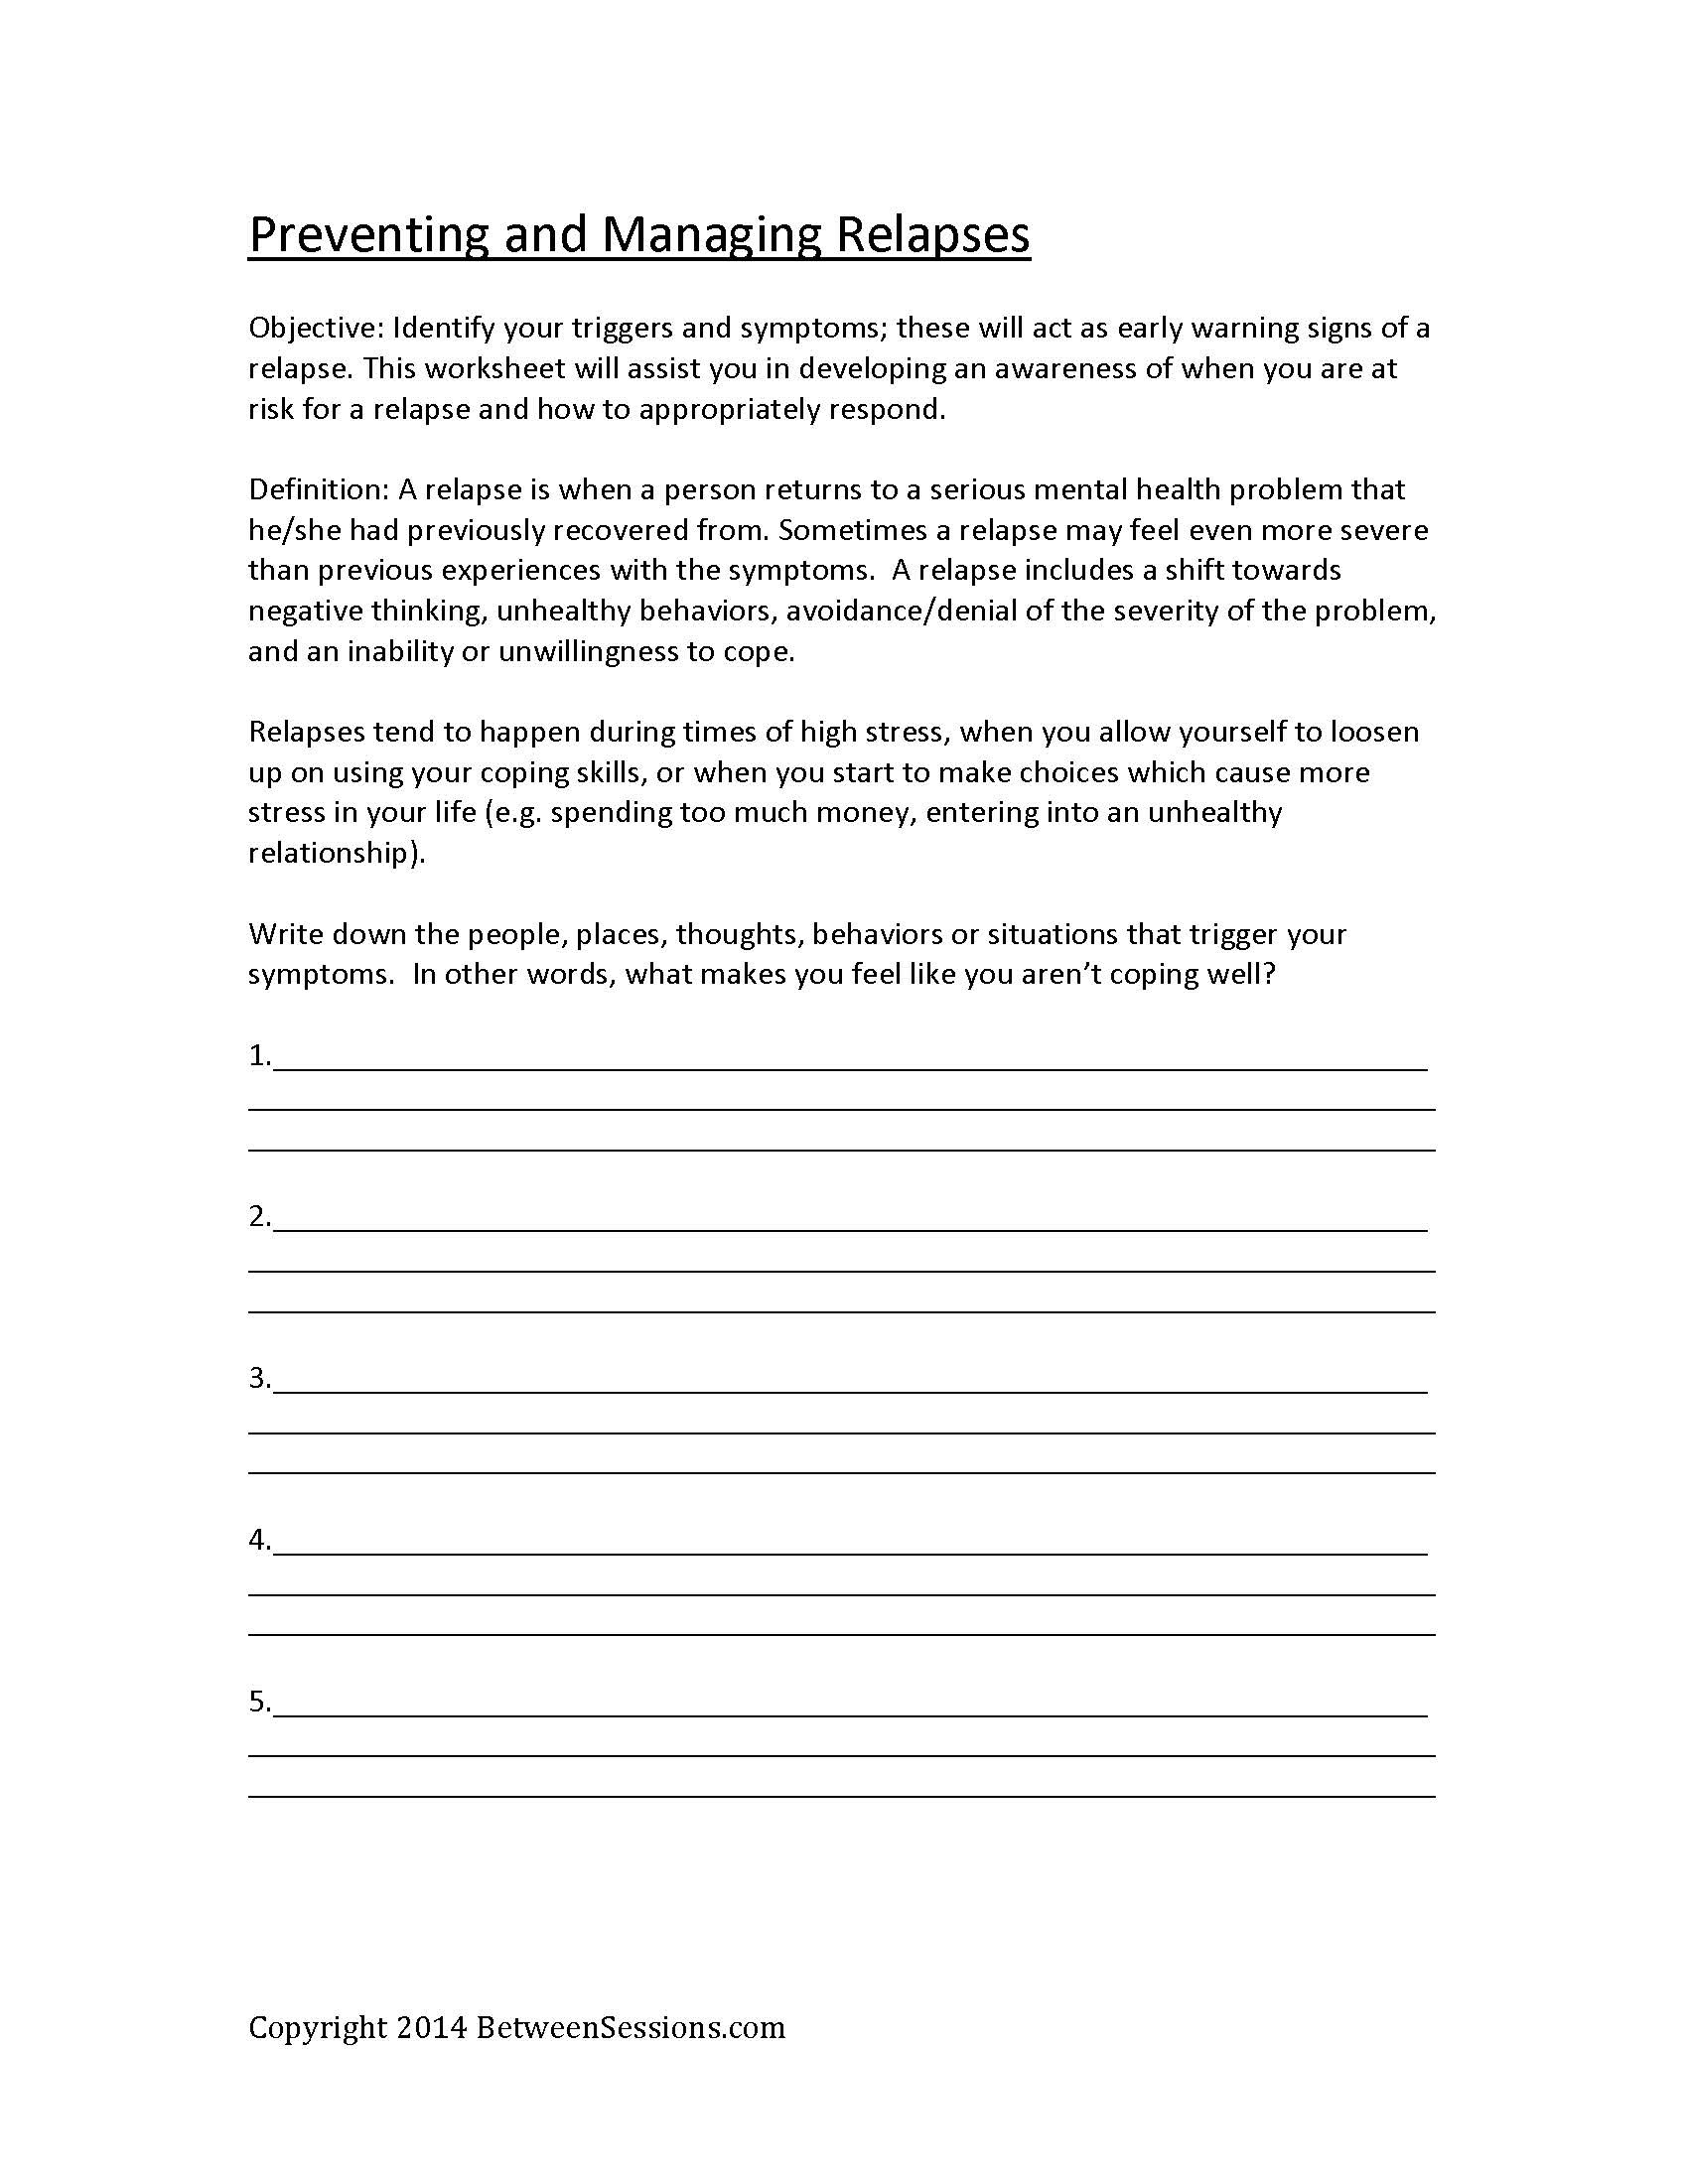 Between Sessions Anger Management Worksheets For Adults